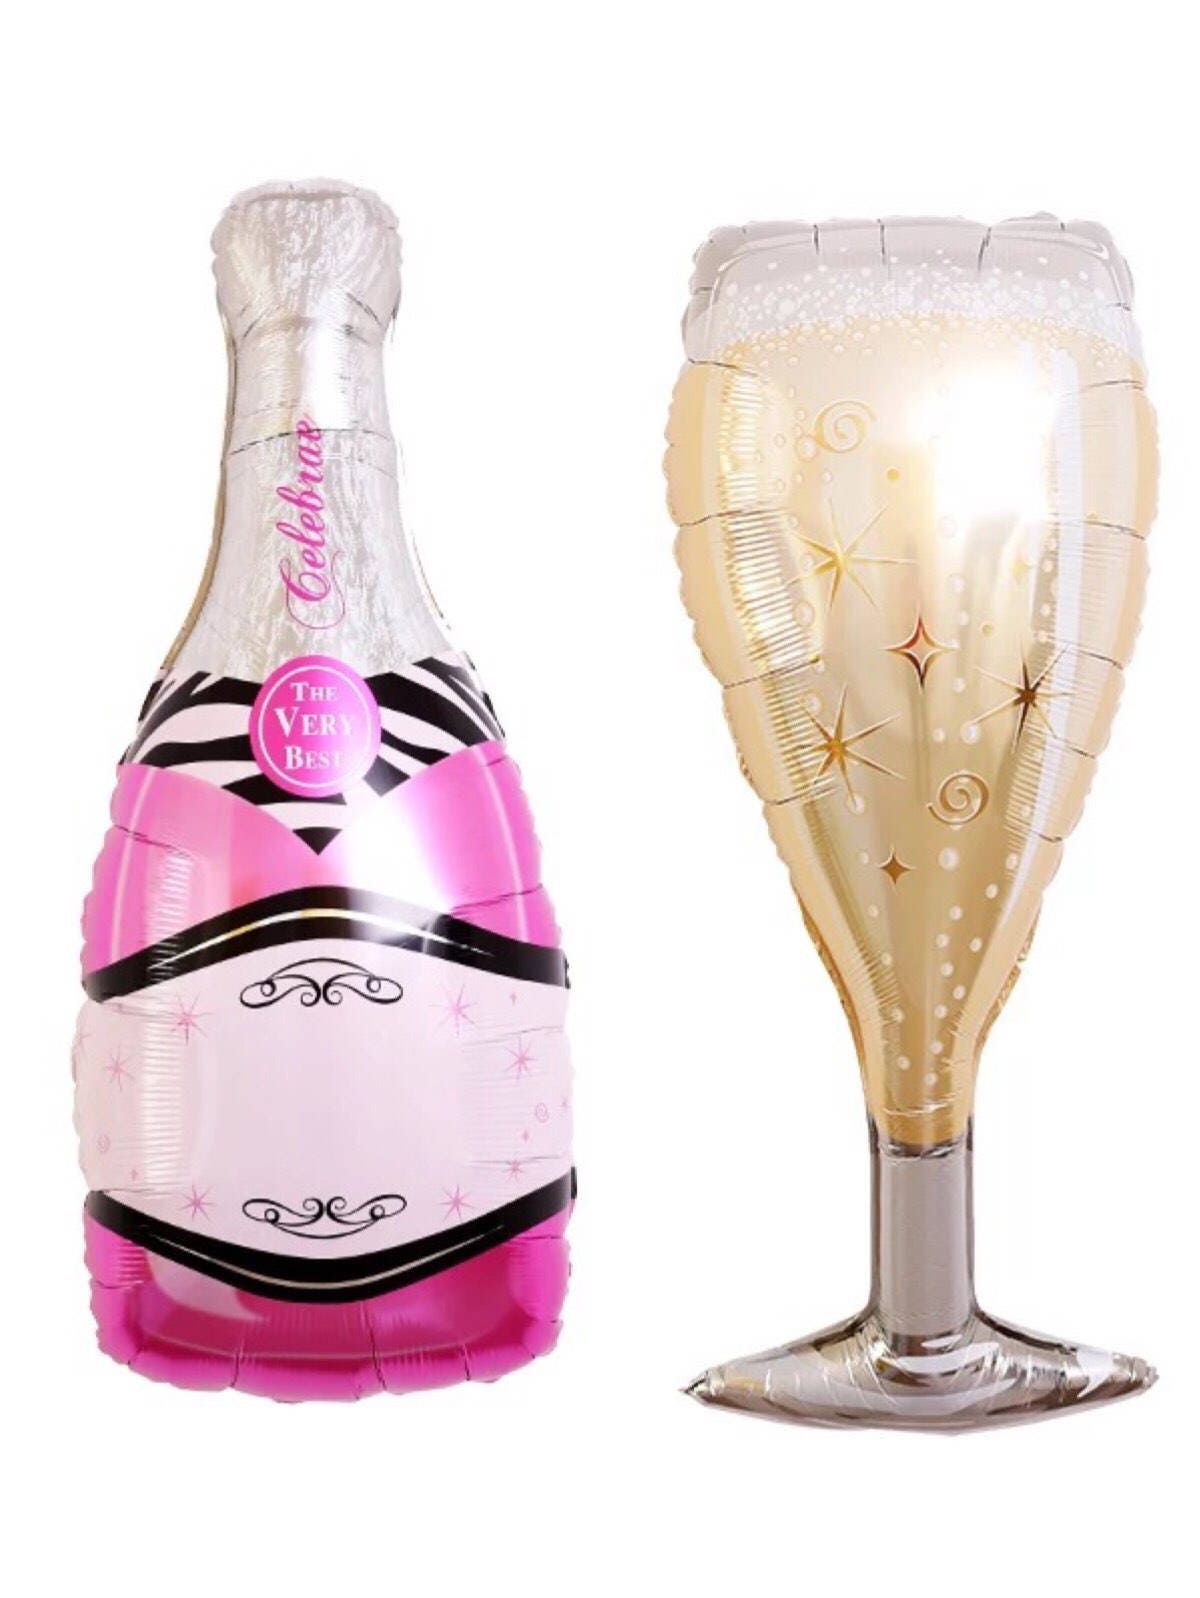  Giant Champagne Bottle Glasses 35.5” x 12 Gold Party Decor  Party Props Bridal Shower Baby Shower Birthday Wedding Graduation  Bachelorette Anniversary Corporate Events Backdrop photobooth Party Prop :  Home & Kitchen